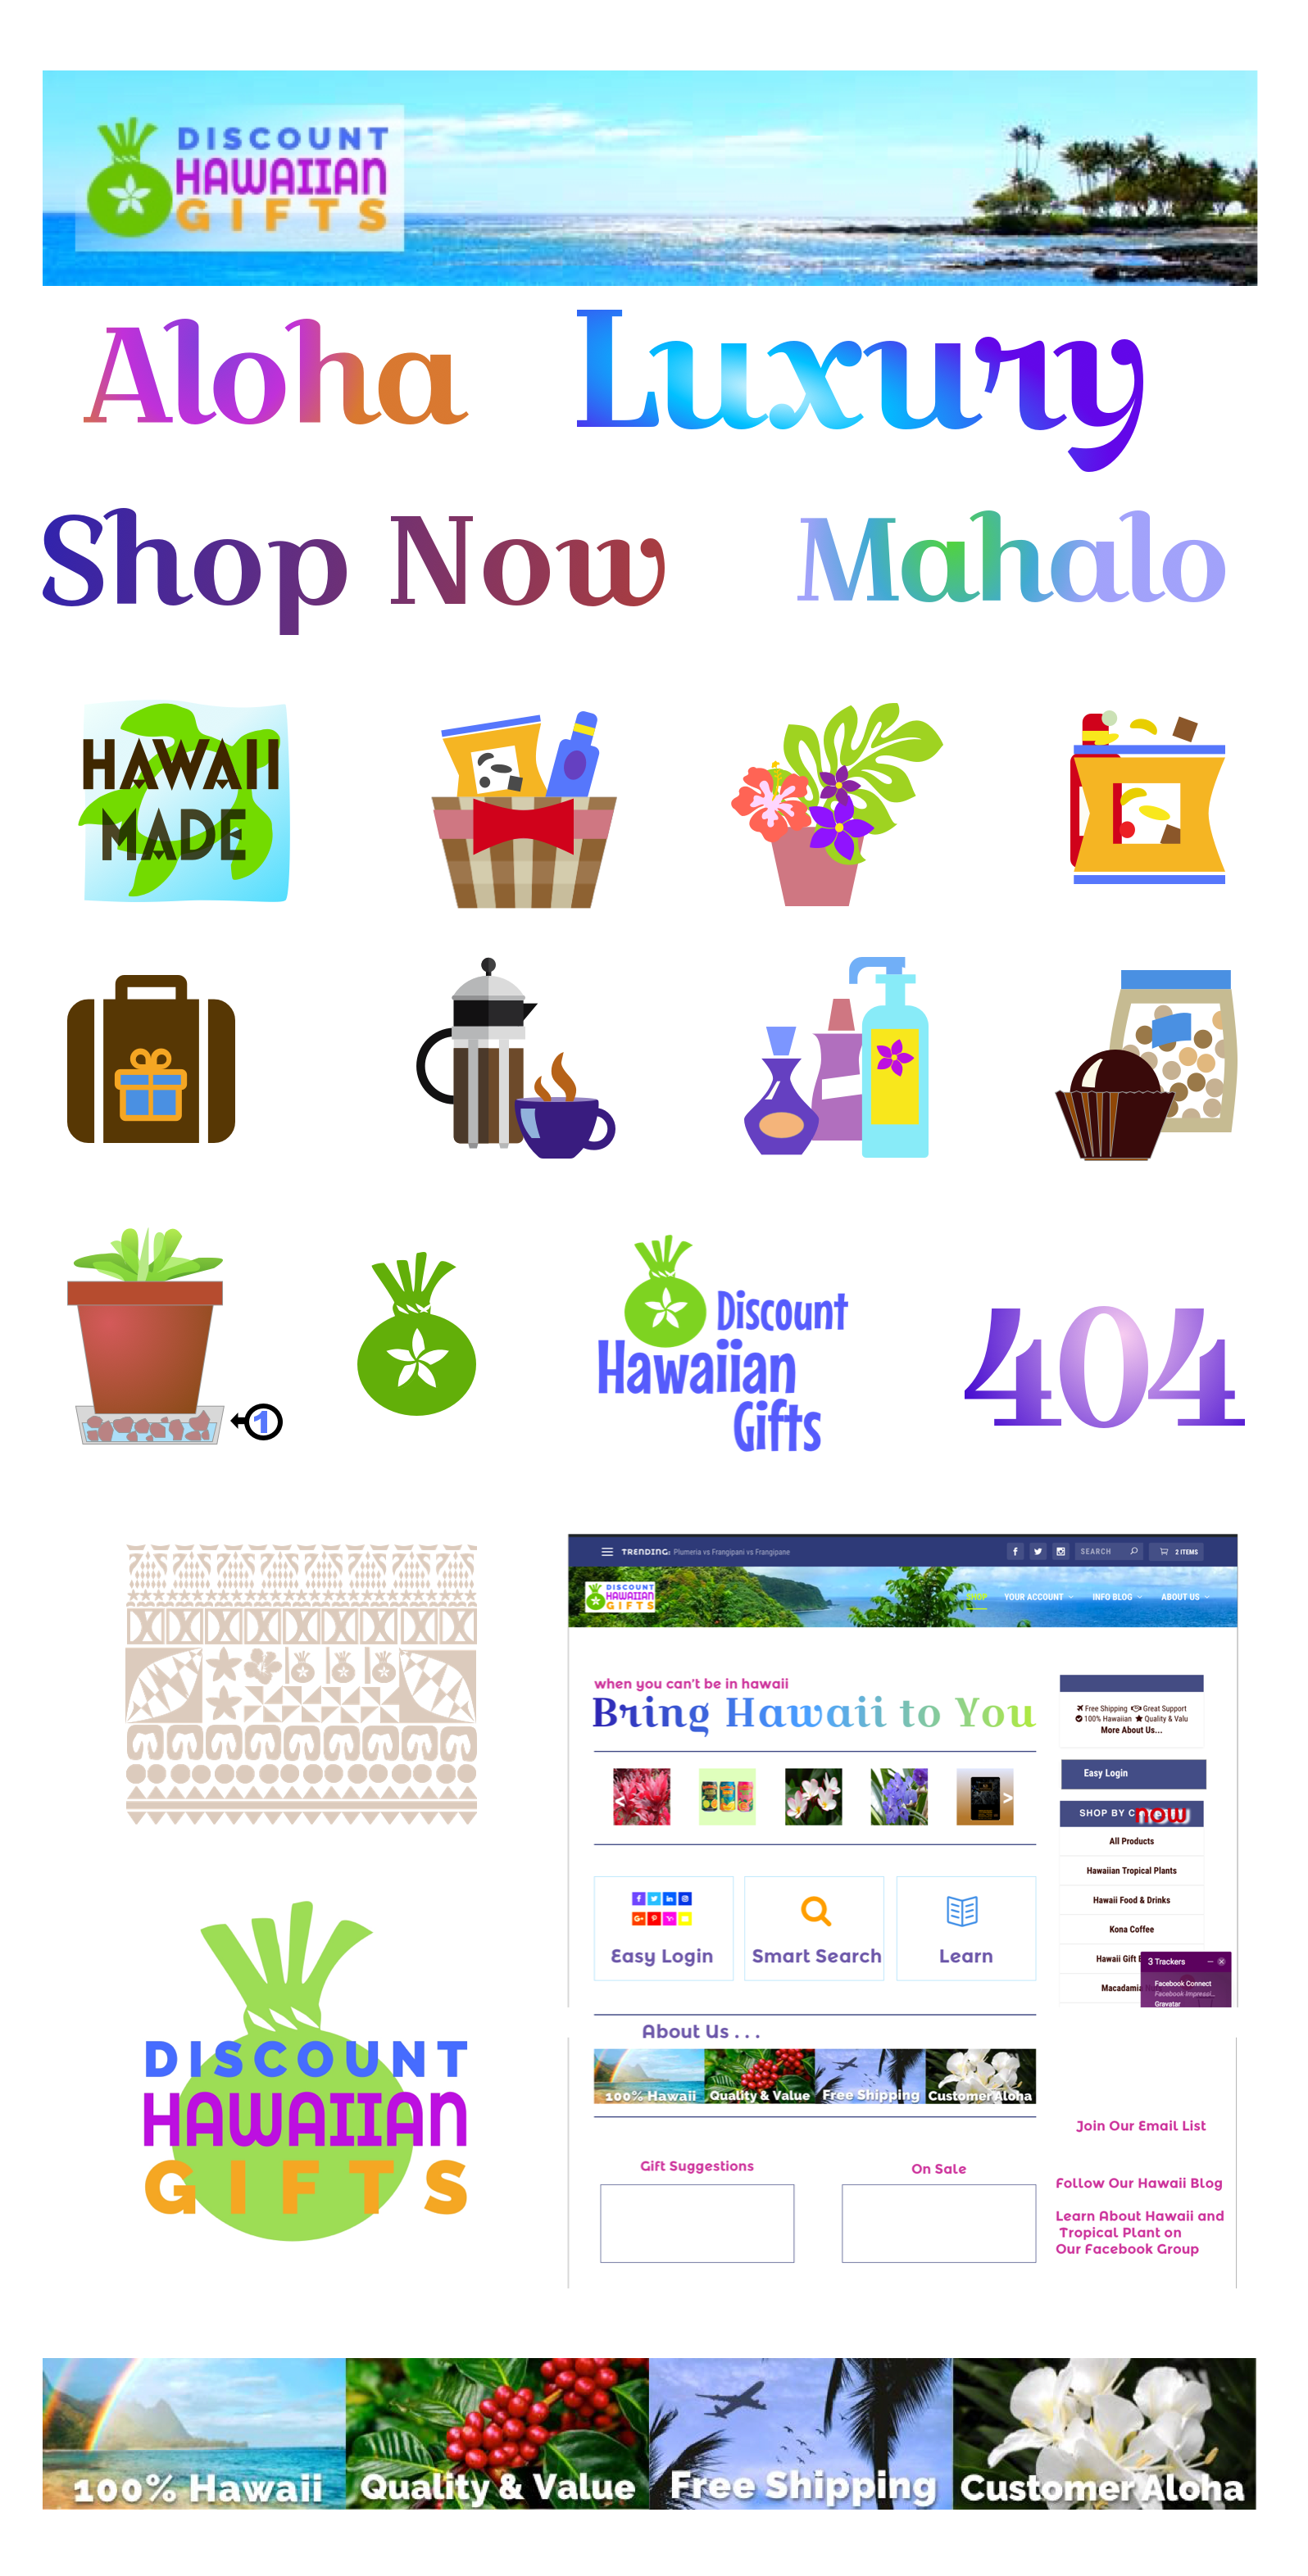 Discount Hawaiian gifts portfolio sheet for website, collateral